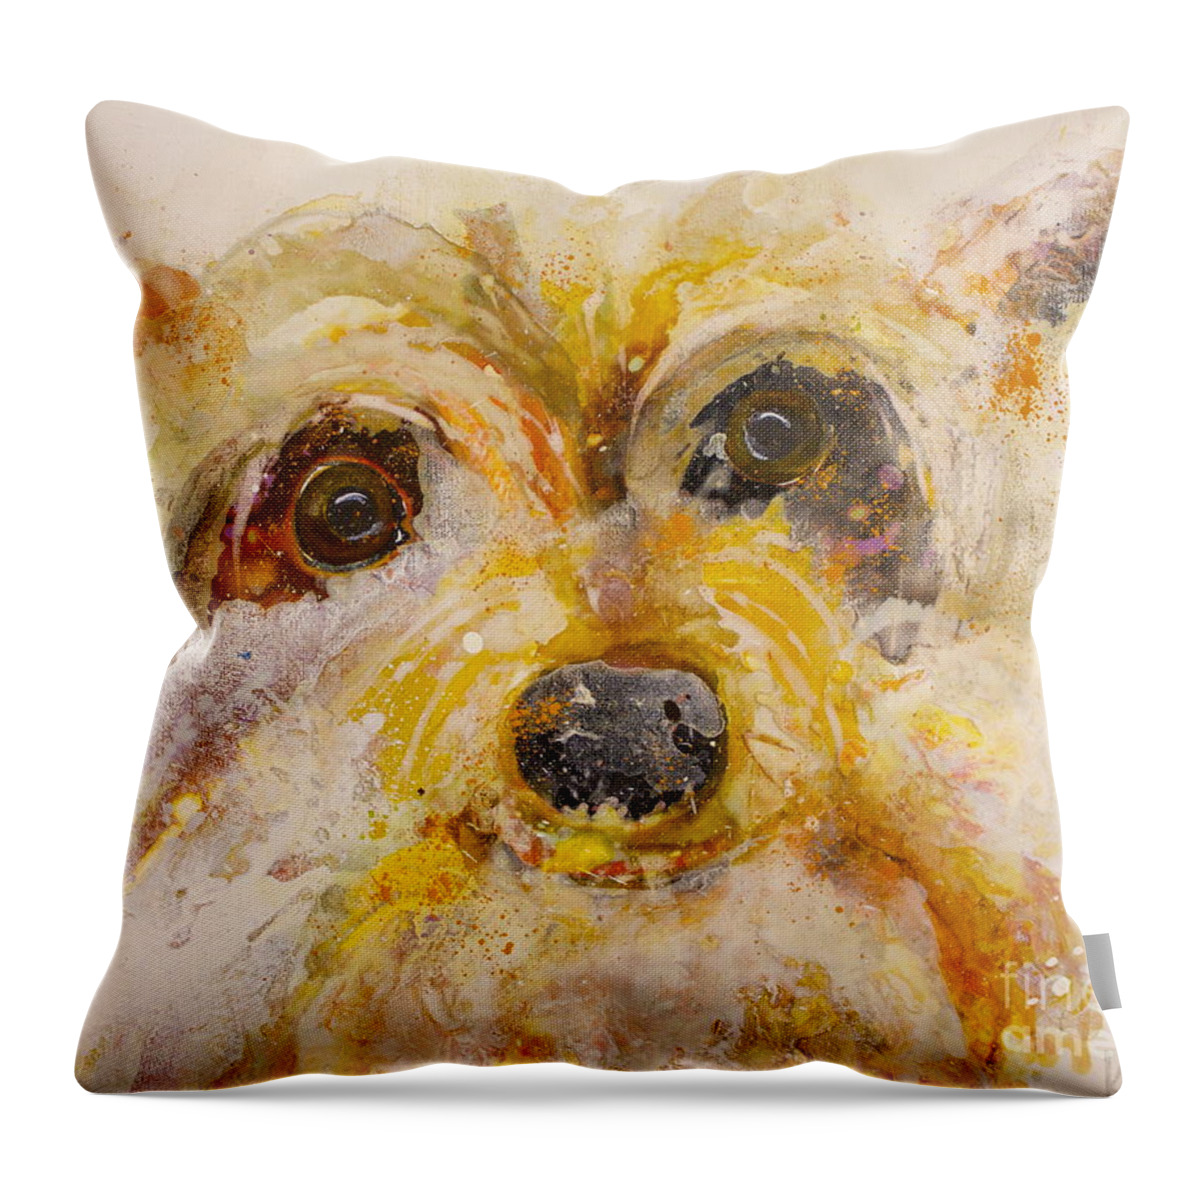 Yoda Throw Pillow featuring the painting Yoga Dog by Kasha Ritter